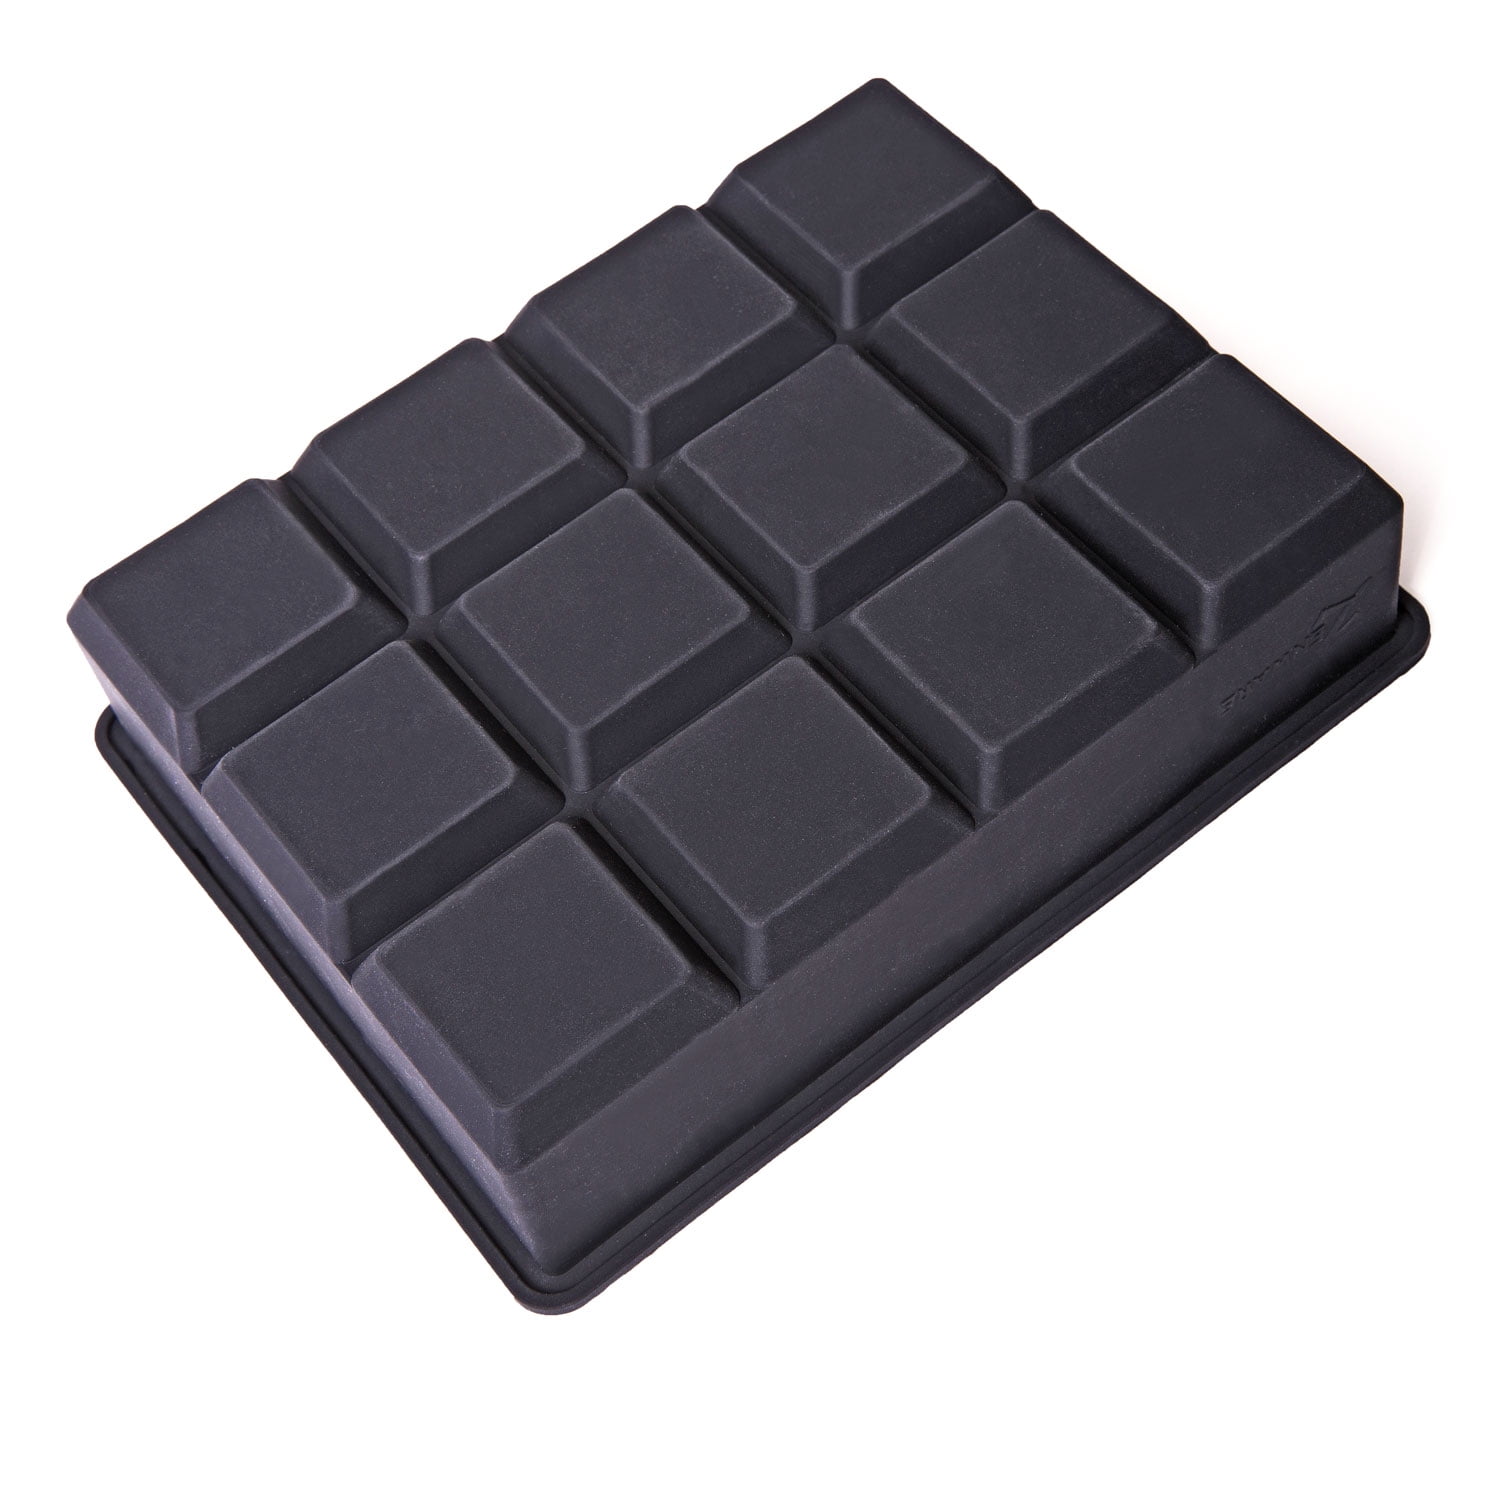 Restaurantware 2-Inch Square Ice Tray - Makes 4 Cubes: Perfect for Commercial Bars or Home Use - Constructed from Durable Black Silicone - Dishwasher Safe - 1-ct - R